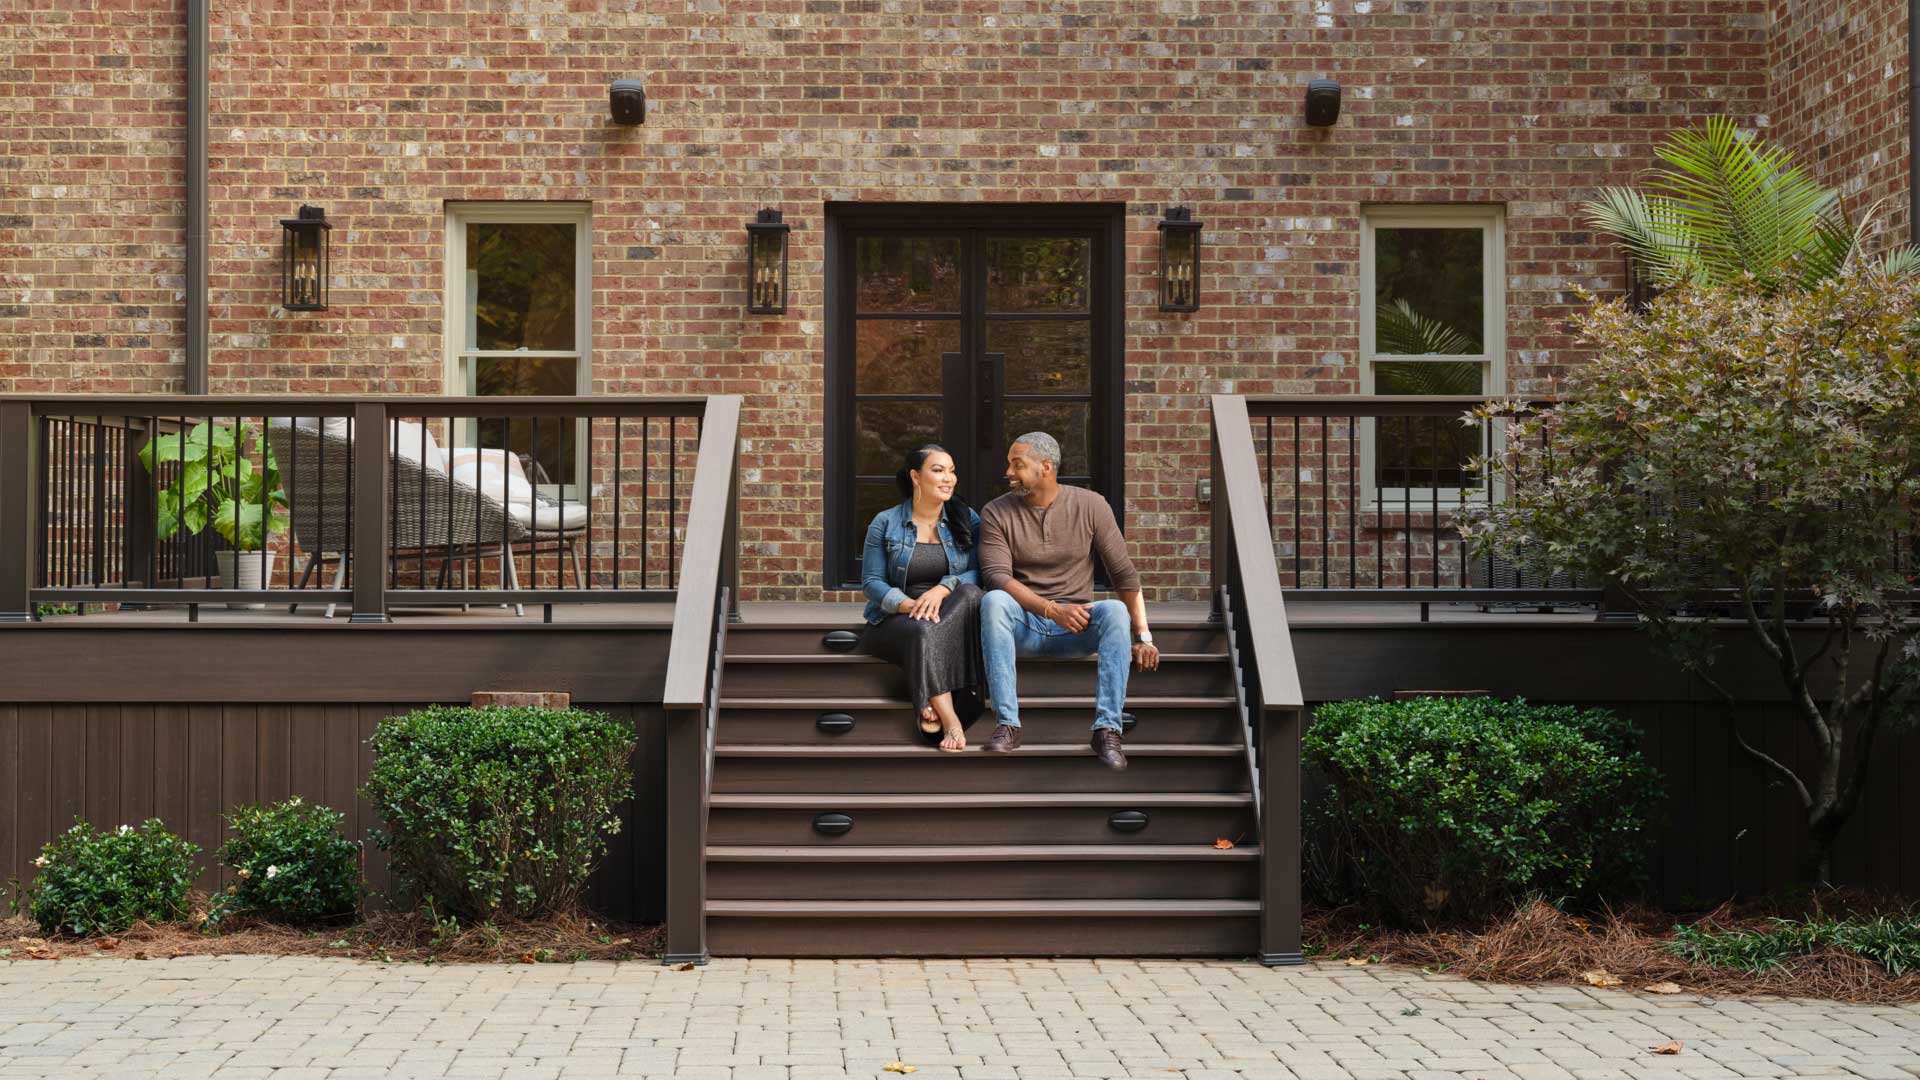 Egypt and Mike, hosts of HGTV's Married to Real Estate, share a quiet moment on the steps of their new outdoor living space